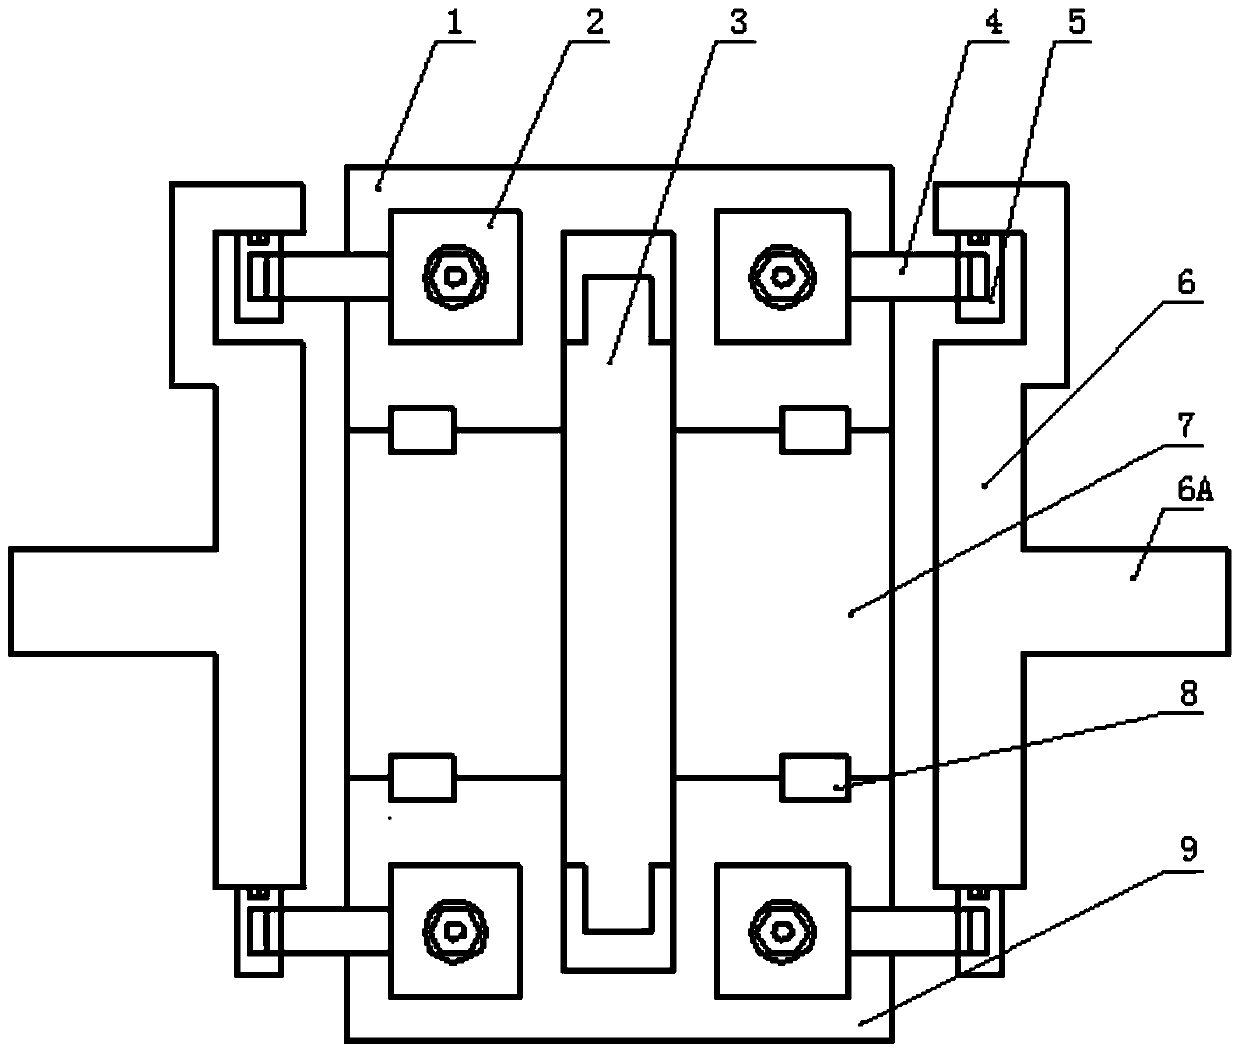 A fixed fast processing device and method for a master switch